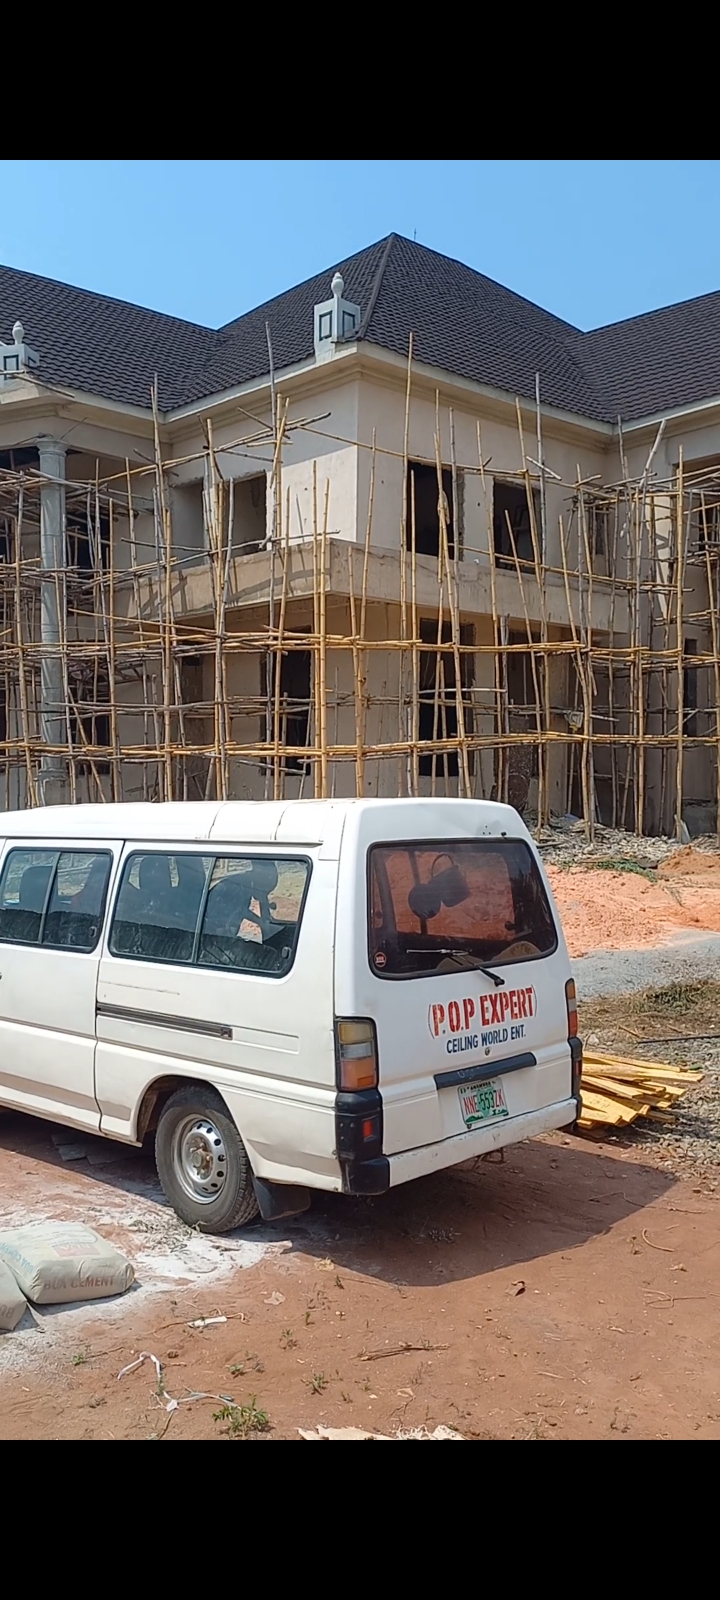 Hi beautiful people, checkout our new ongoing project at Utuh, Nnewi in Anambra state. House belongs to Ataka.